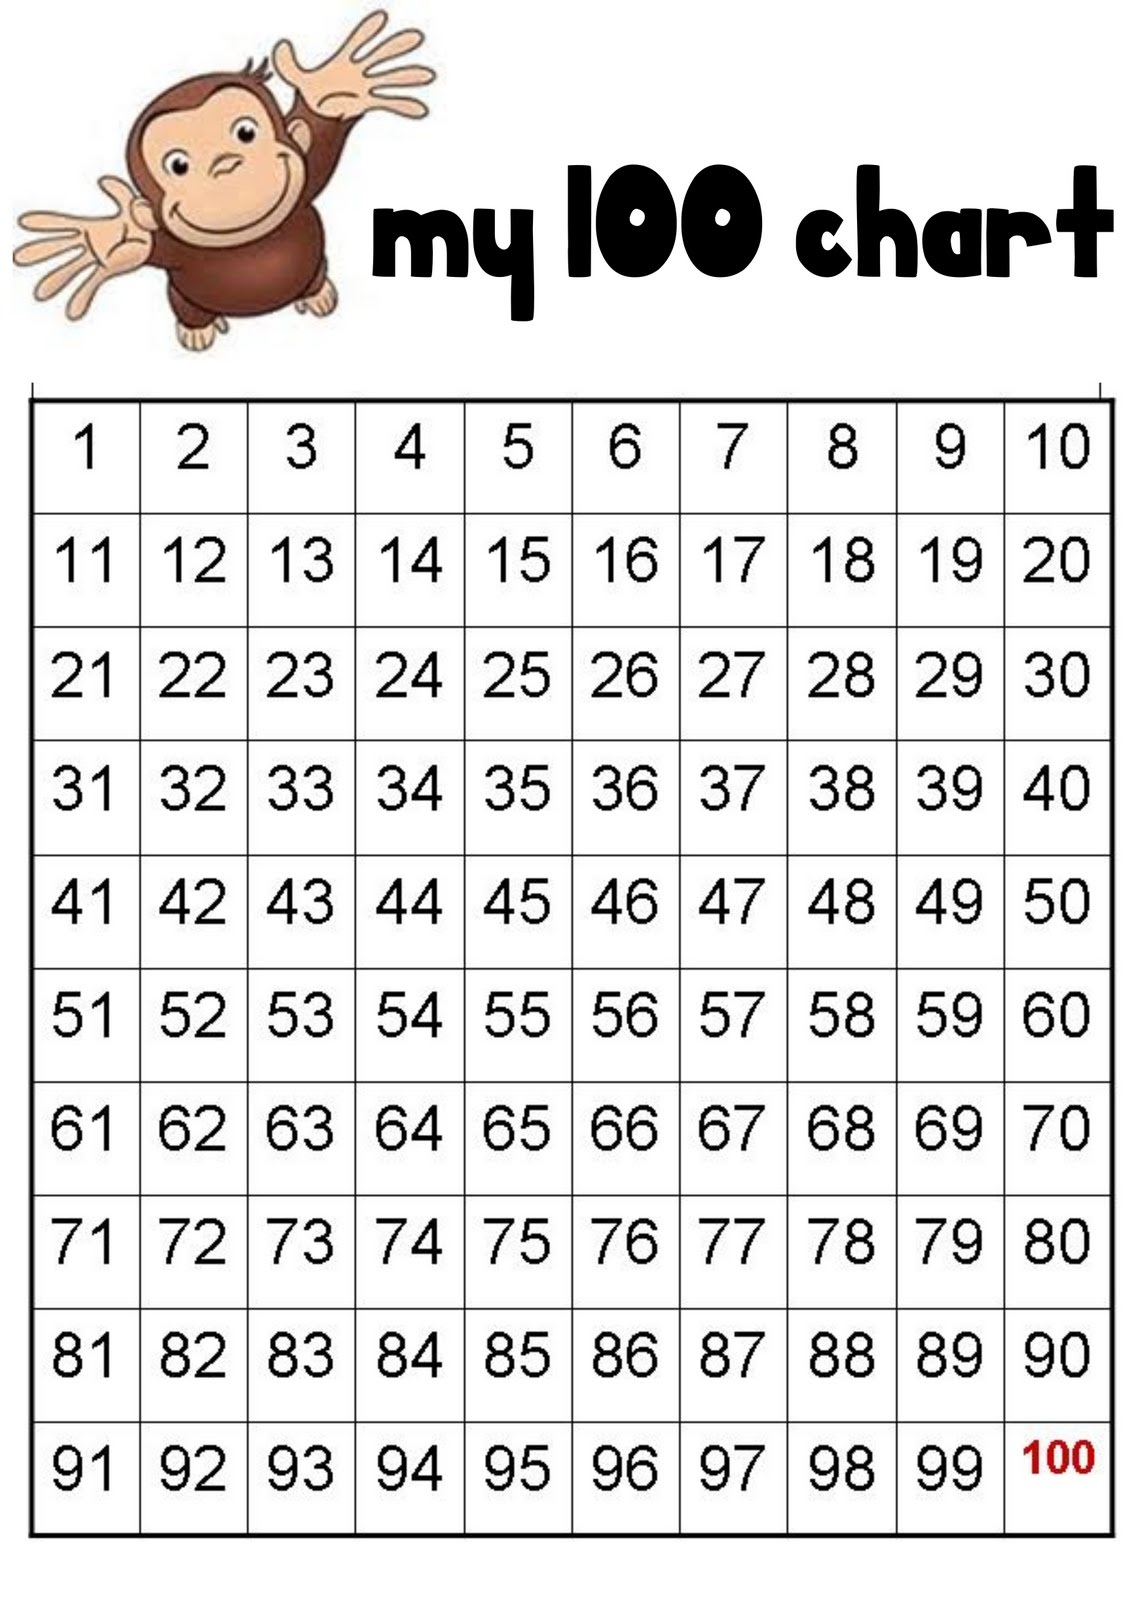 printable-number-chart-1-100-activity-shelter-printable-1-100-number